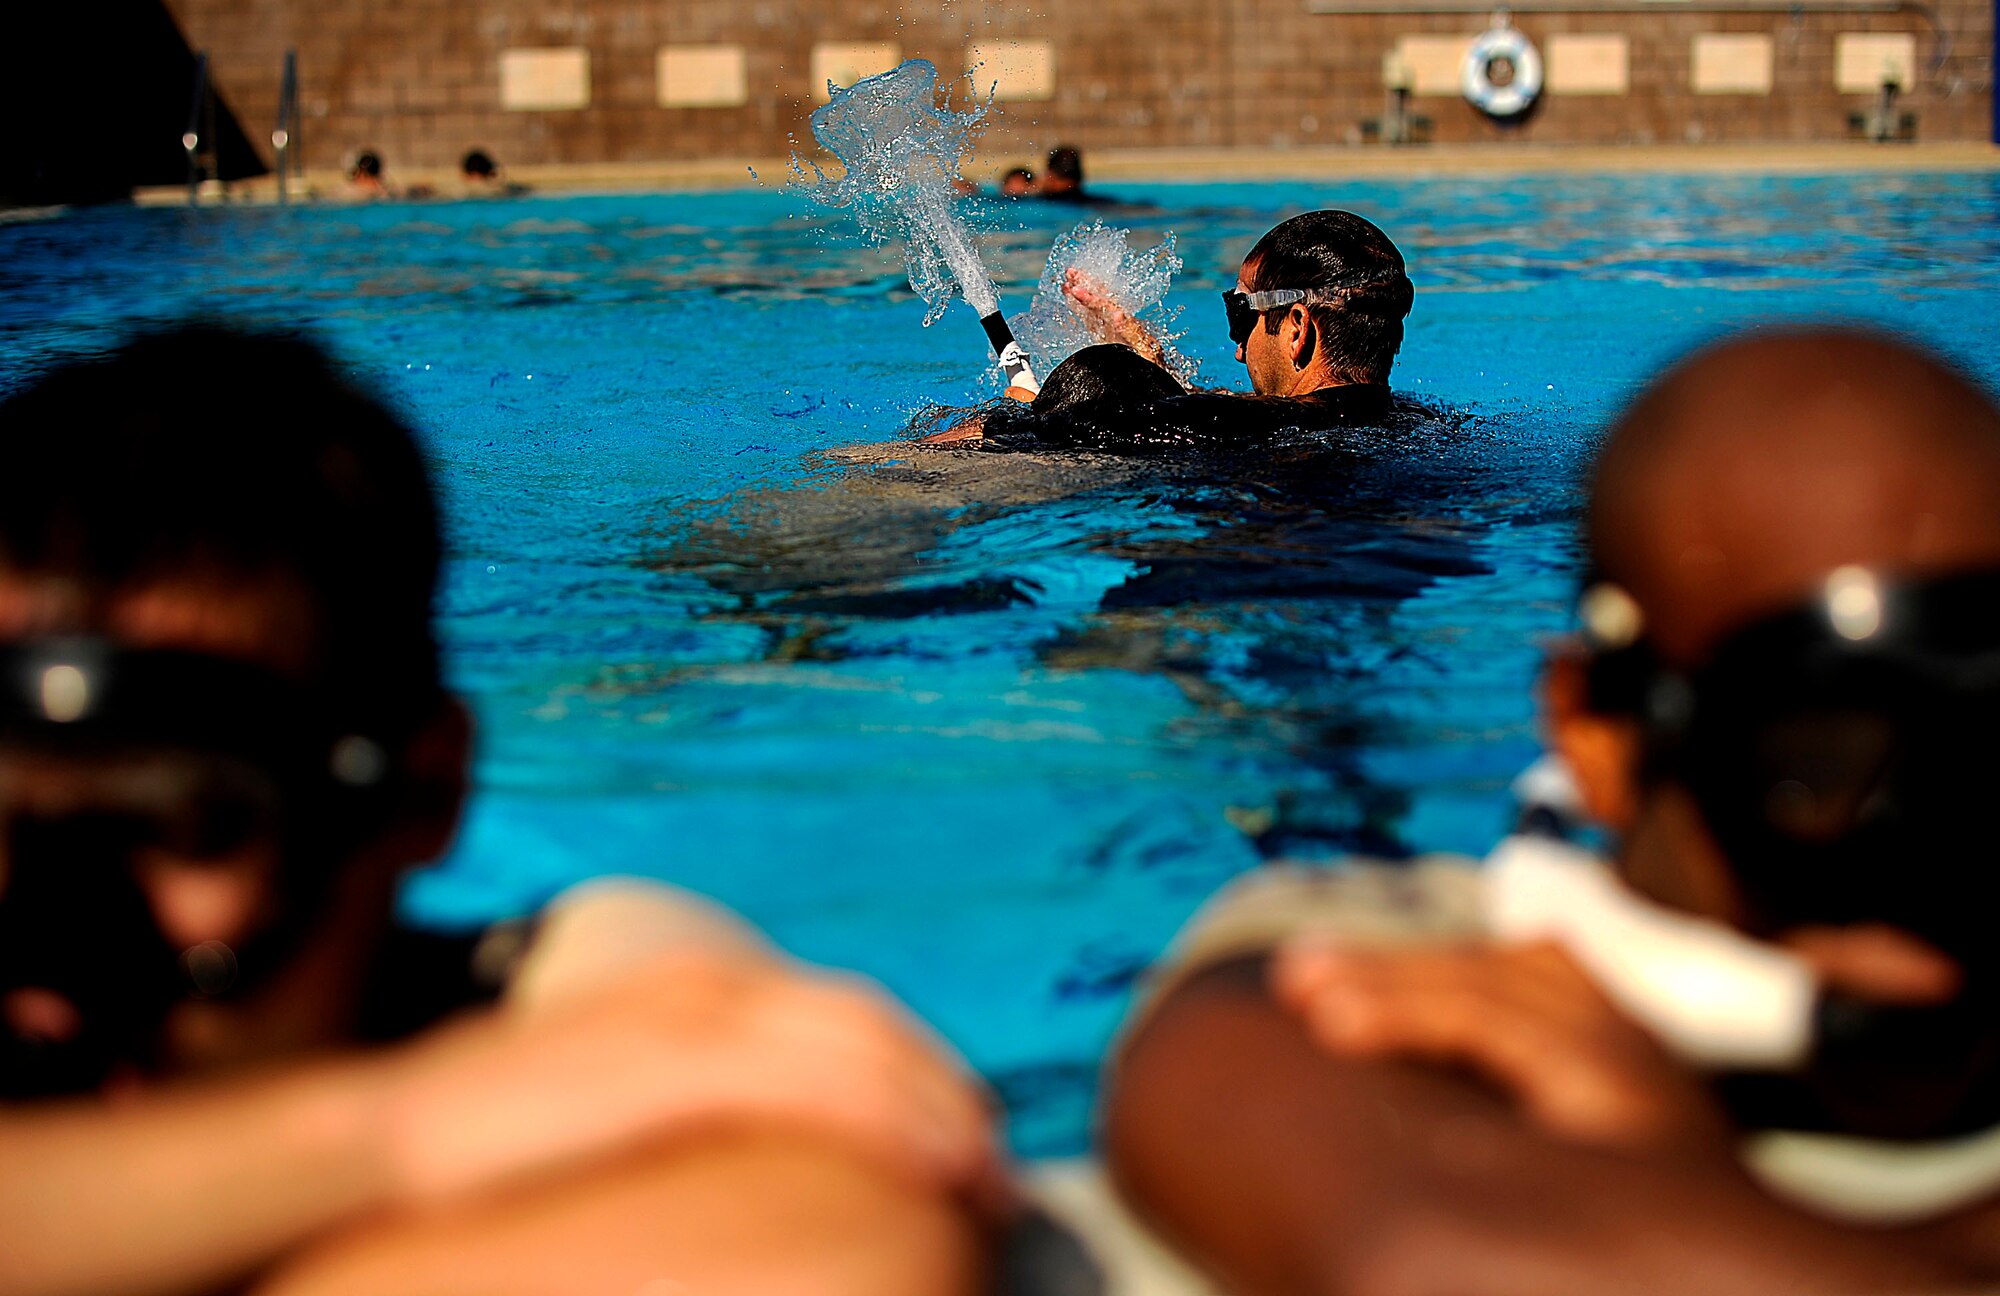 A U.S. Air Force Special Tactics Instructor from the Special Tactics Training Squadron, Air Force Special Operations Command, Hurlburt Field, Fla., tests students on buddy breathing during pre-scuba training Sept. 21, 2010. (U.S. Air Force Photo by Master Sgt. Russell E Cooley IV/Released)